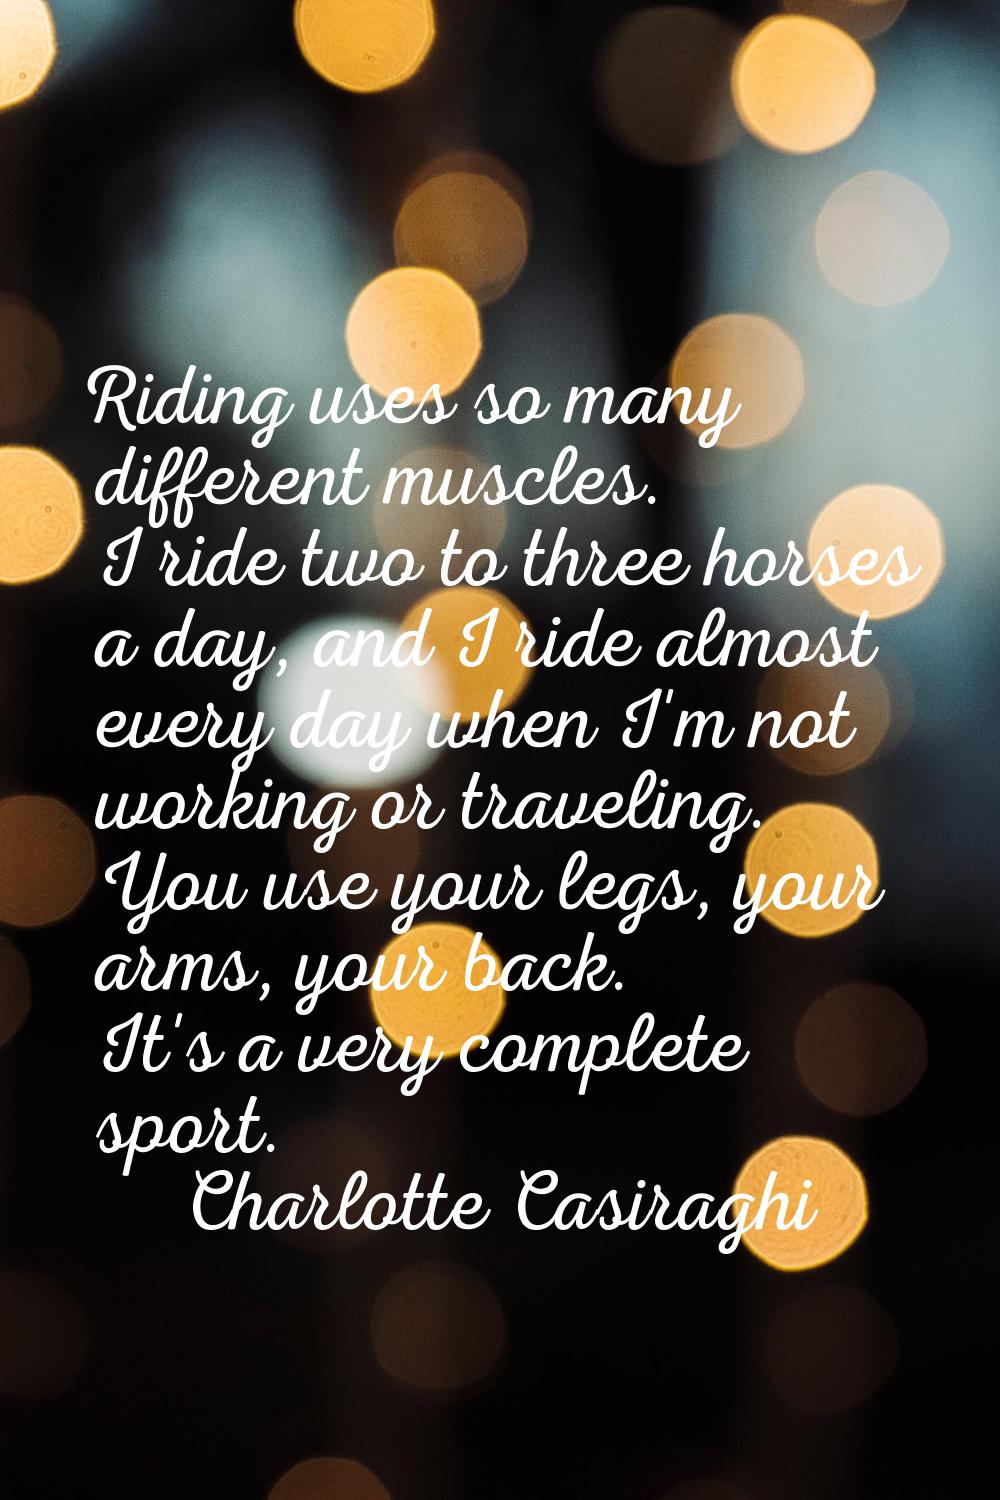 Riding uses so many different muscles. I ride two to three horses a day, and I ride almost every da